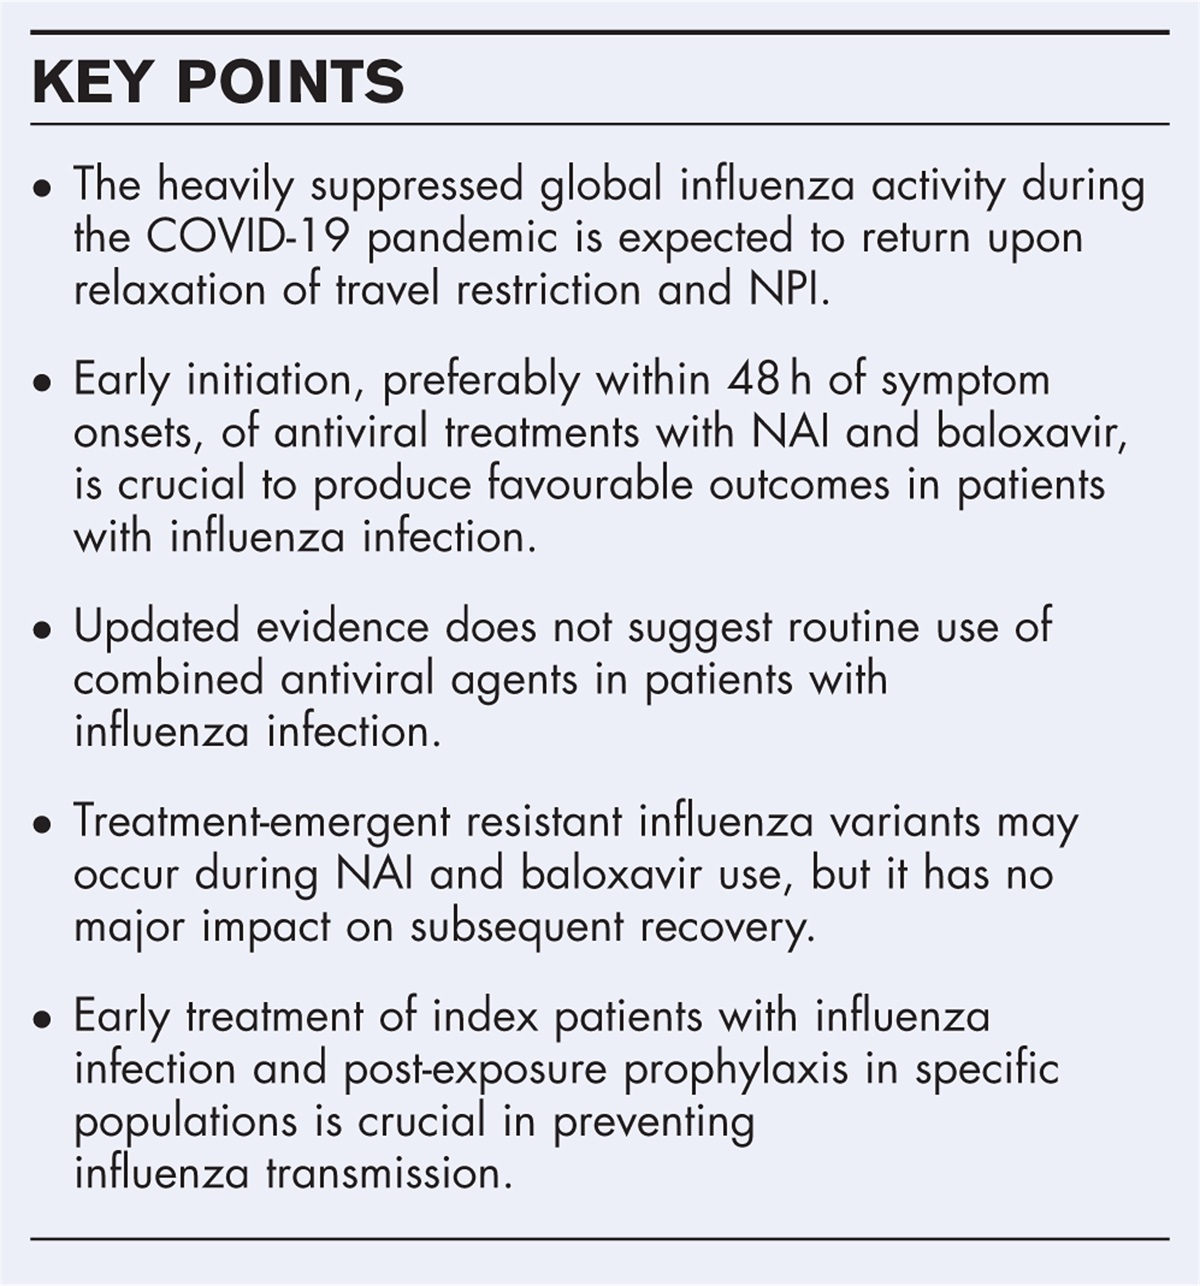 Antiviral therapies for influenza